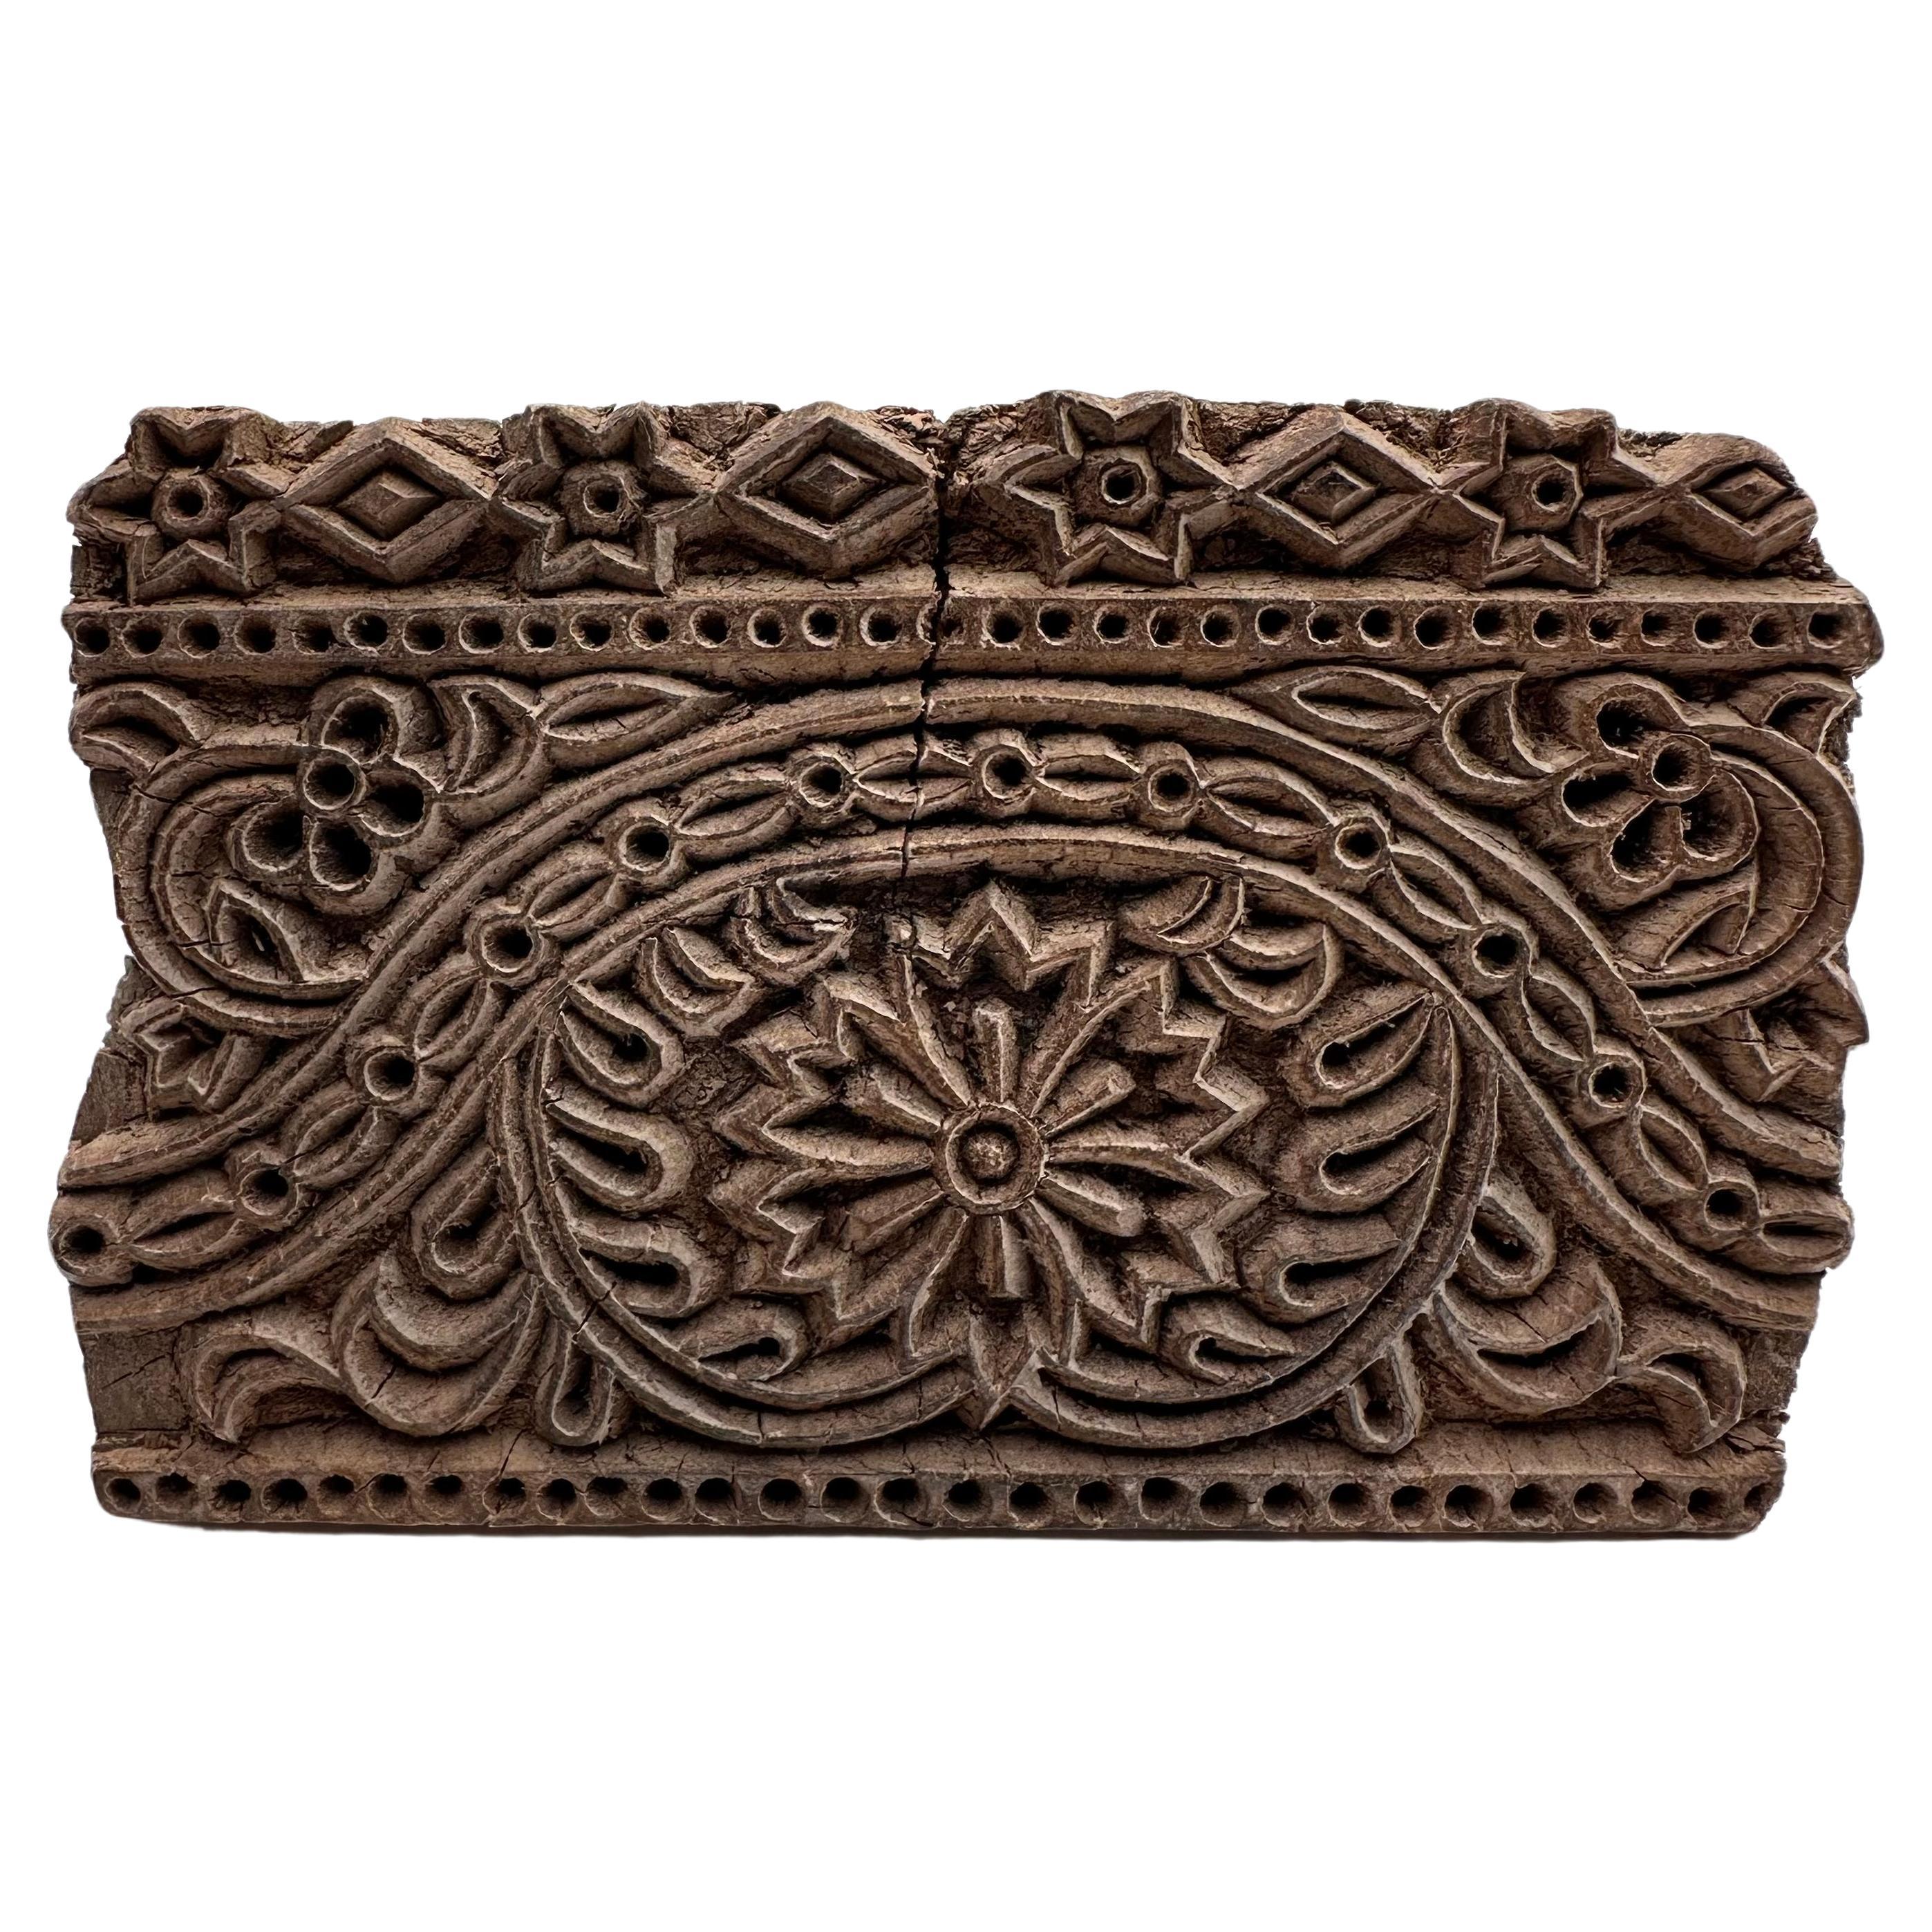 Antique Hand Carved Wood Printing Block with Flower and Star Pattern